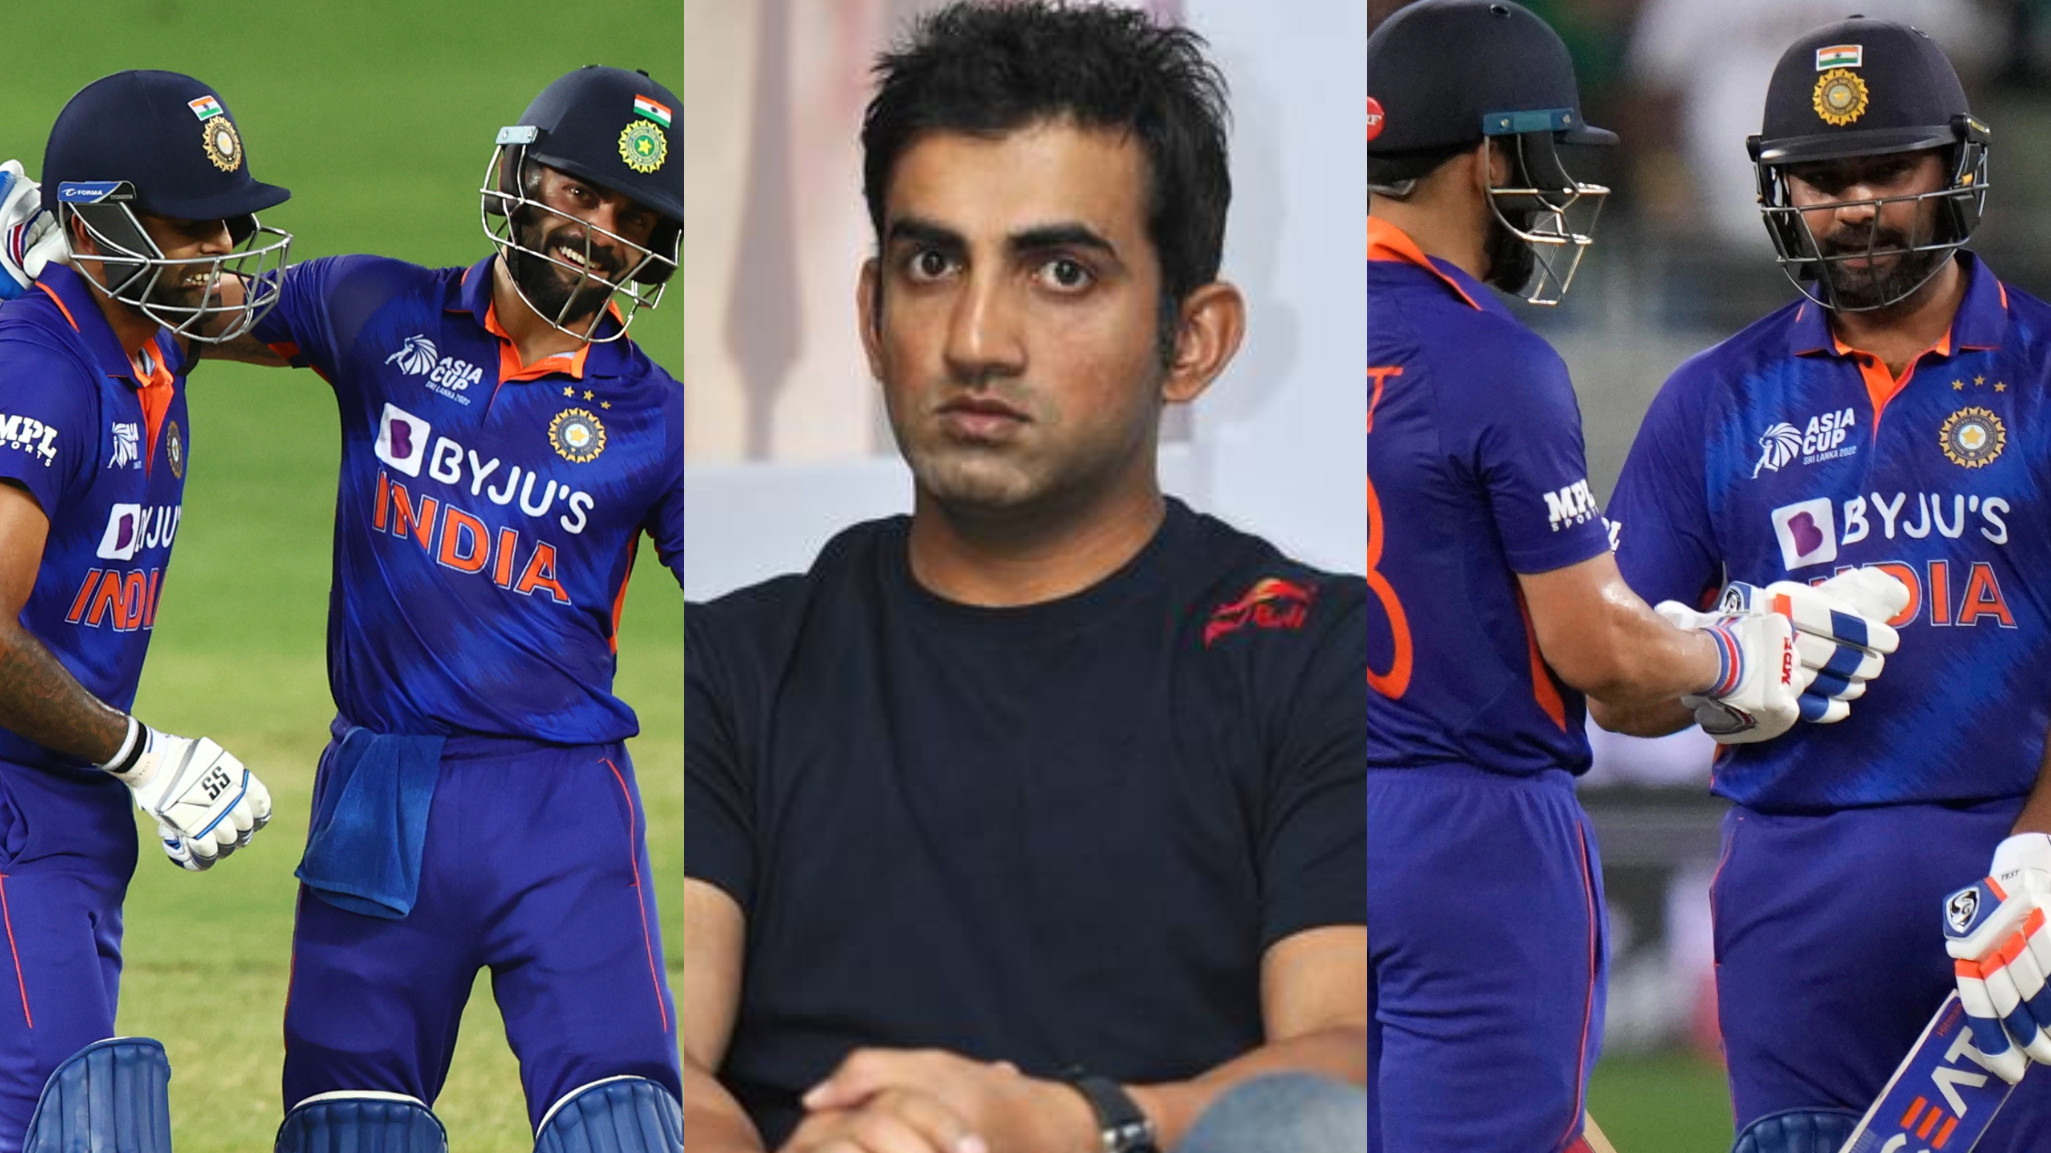 WATCH- 'Kohli can’t bat like Surya and vice-versa'- Gambhir says identifying correct players for 2023 WC crucial for India